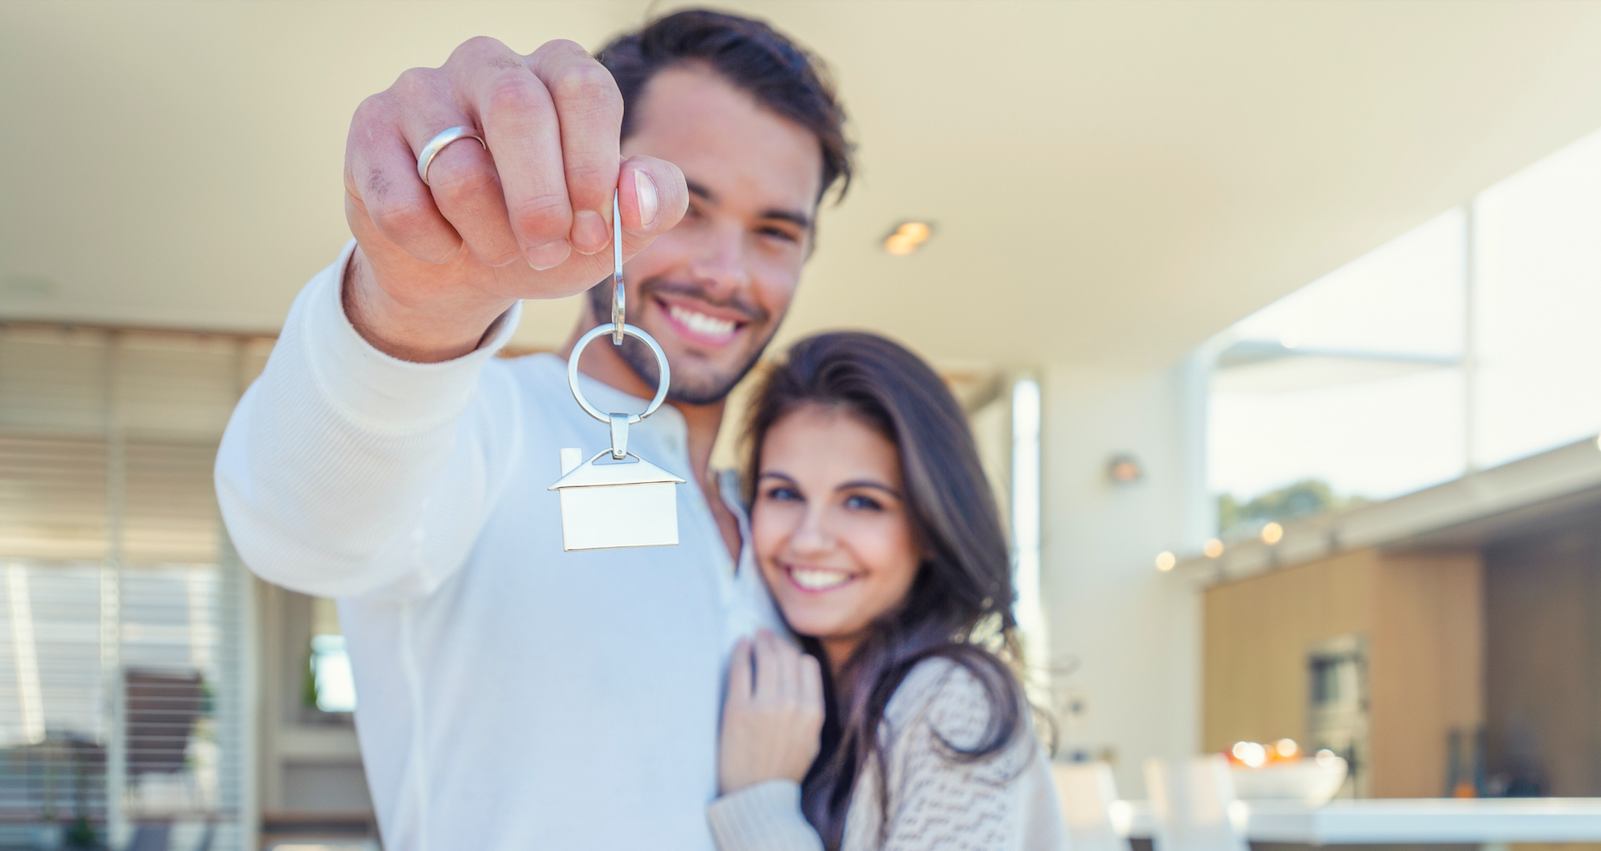 5 Tips & Tricks for the First Home Buyer